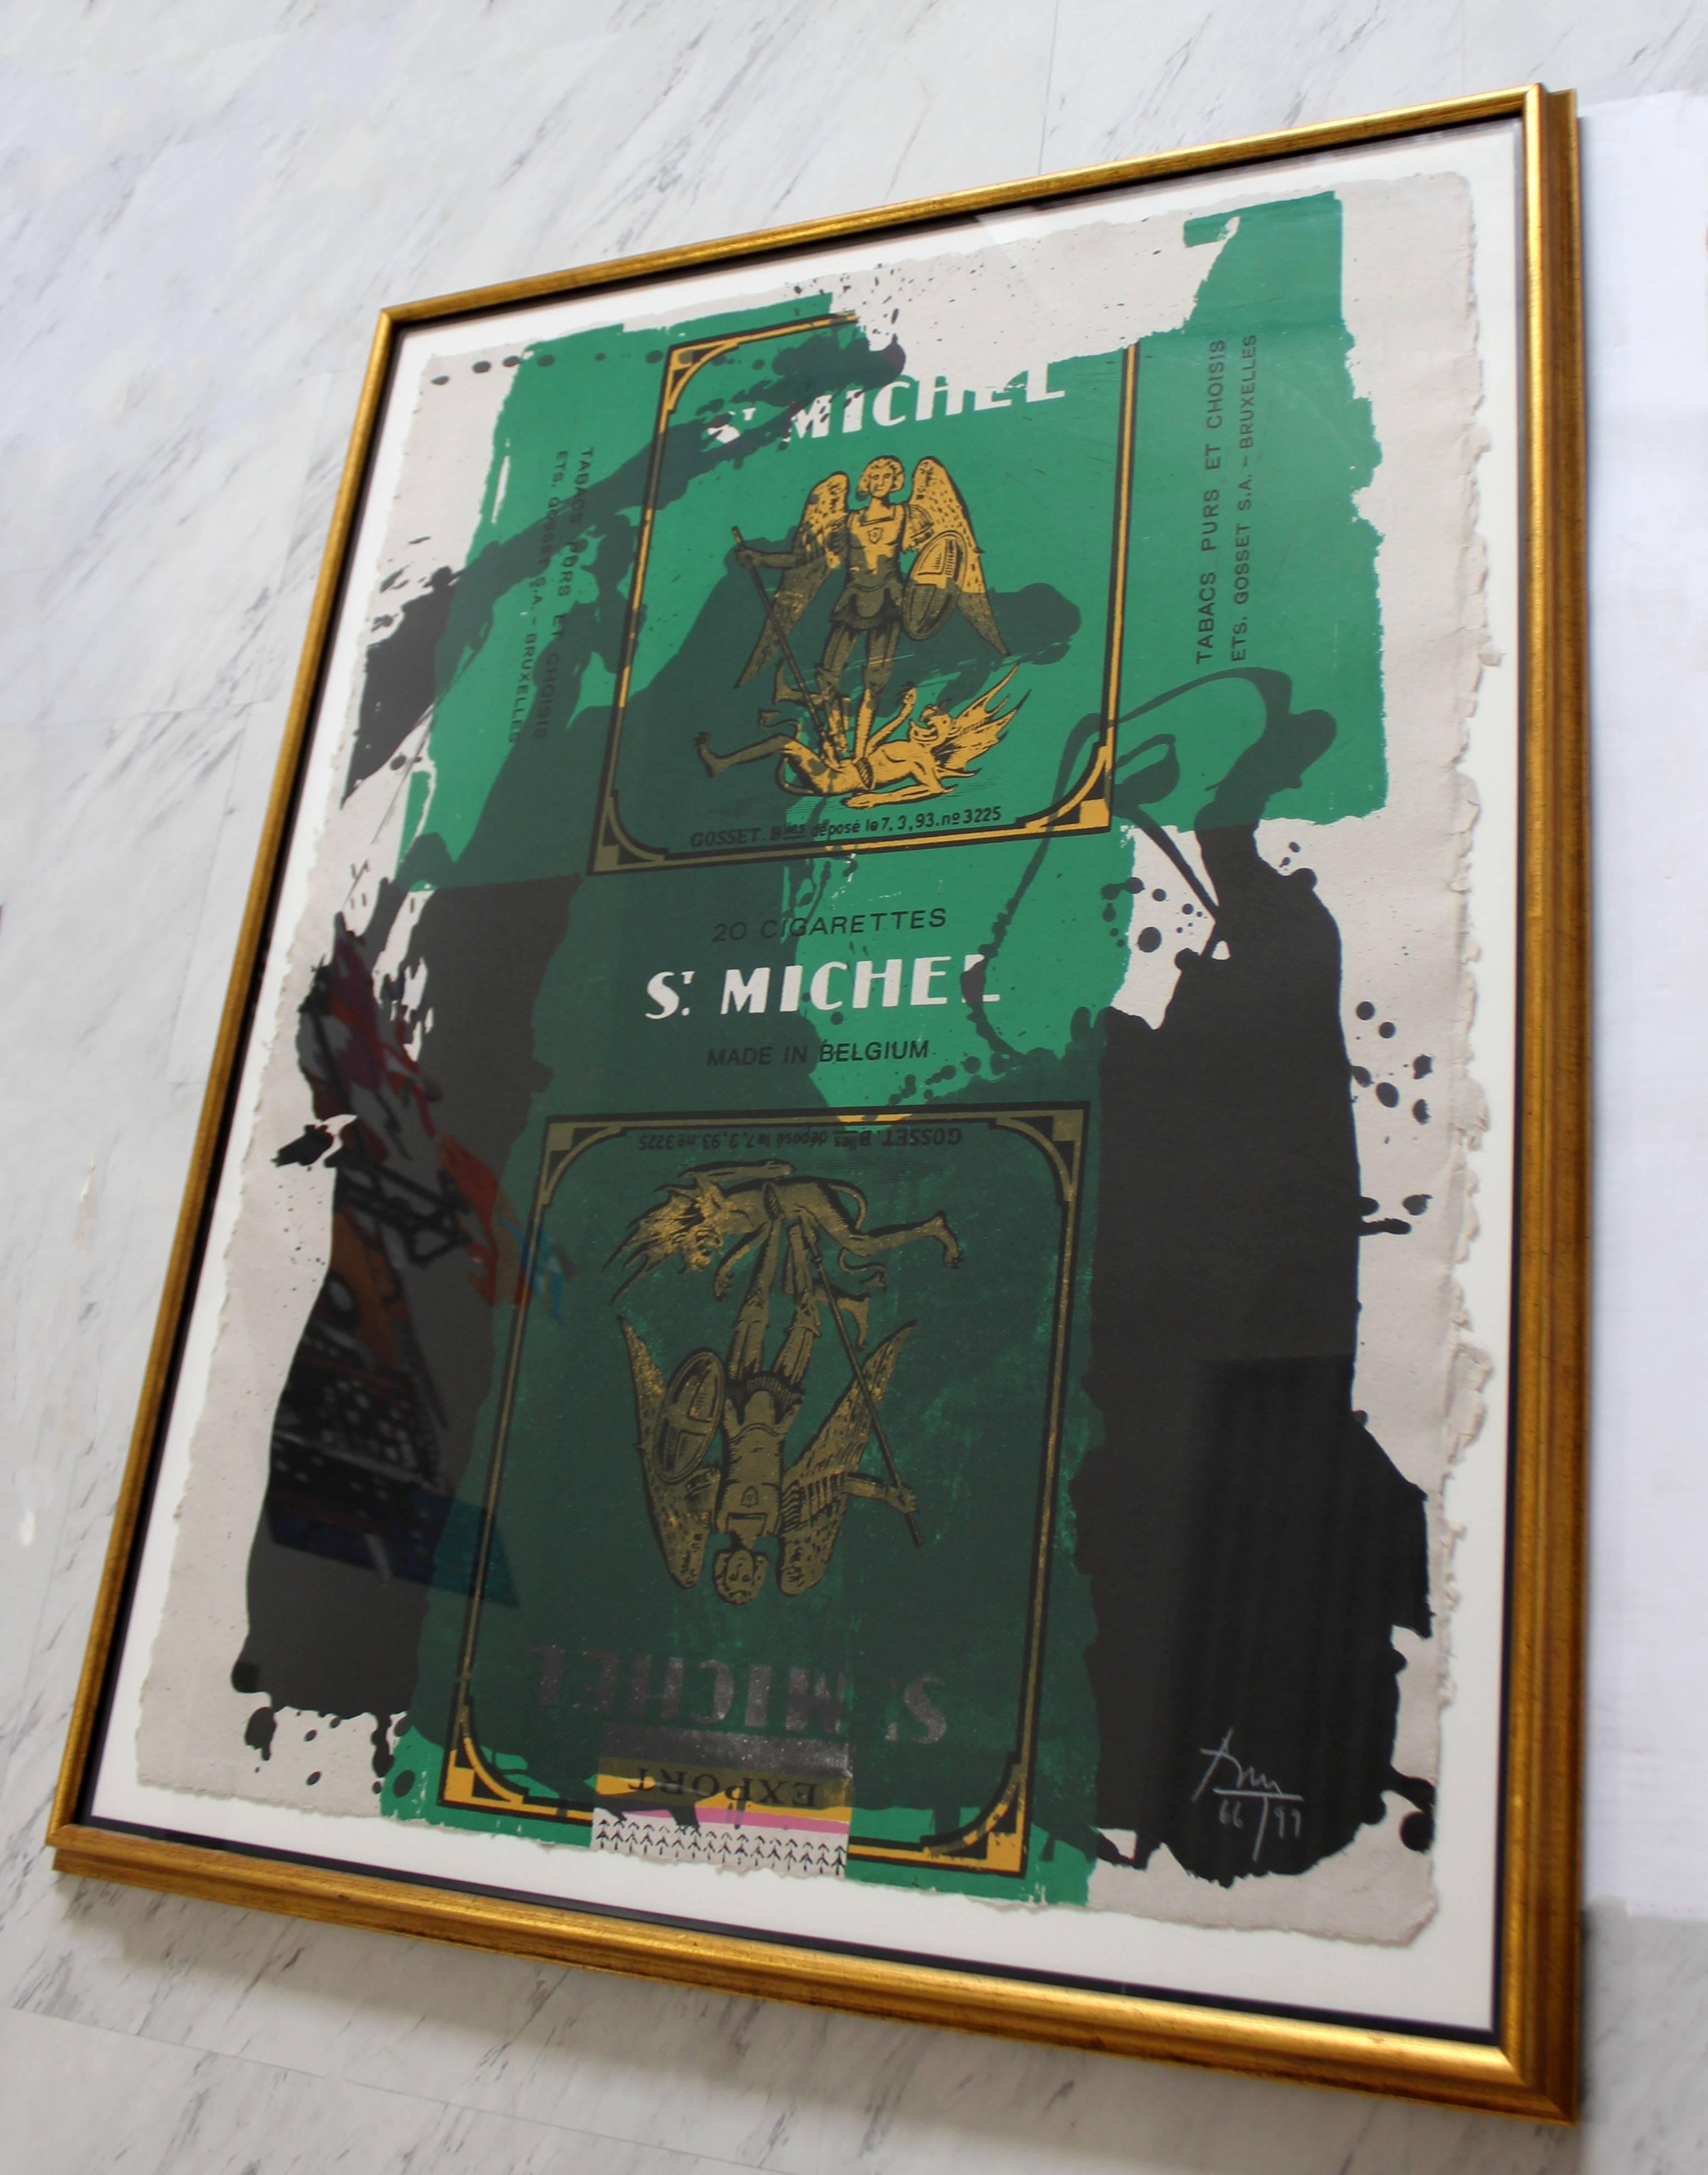 For your consideration is a St. Michael III screenprint lithograph by Robert Motherwell numbered 66/99. In excellent condition. The dimensions of the frame are 37